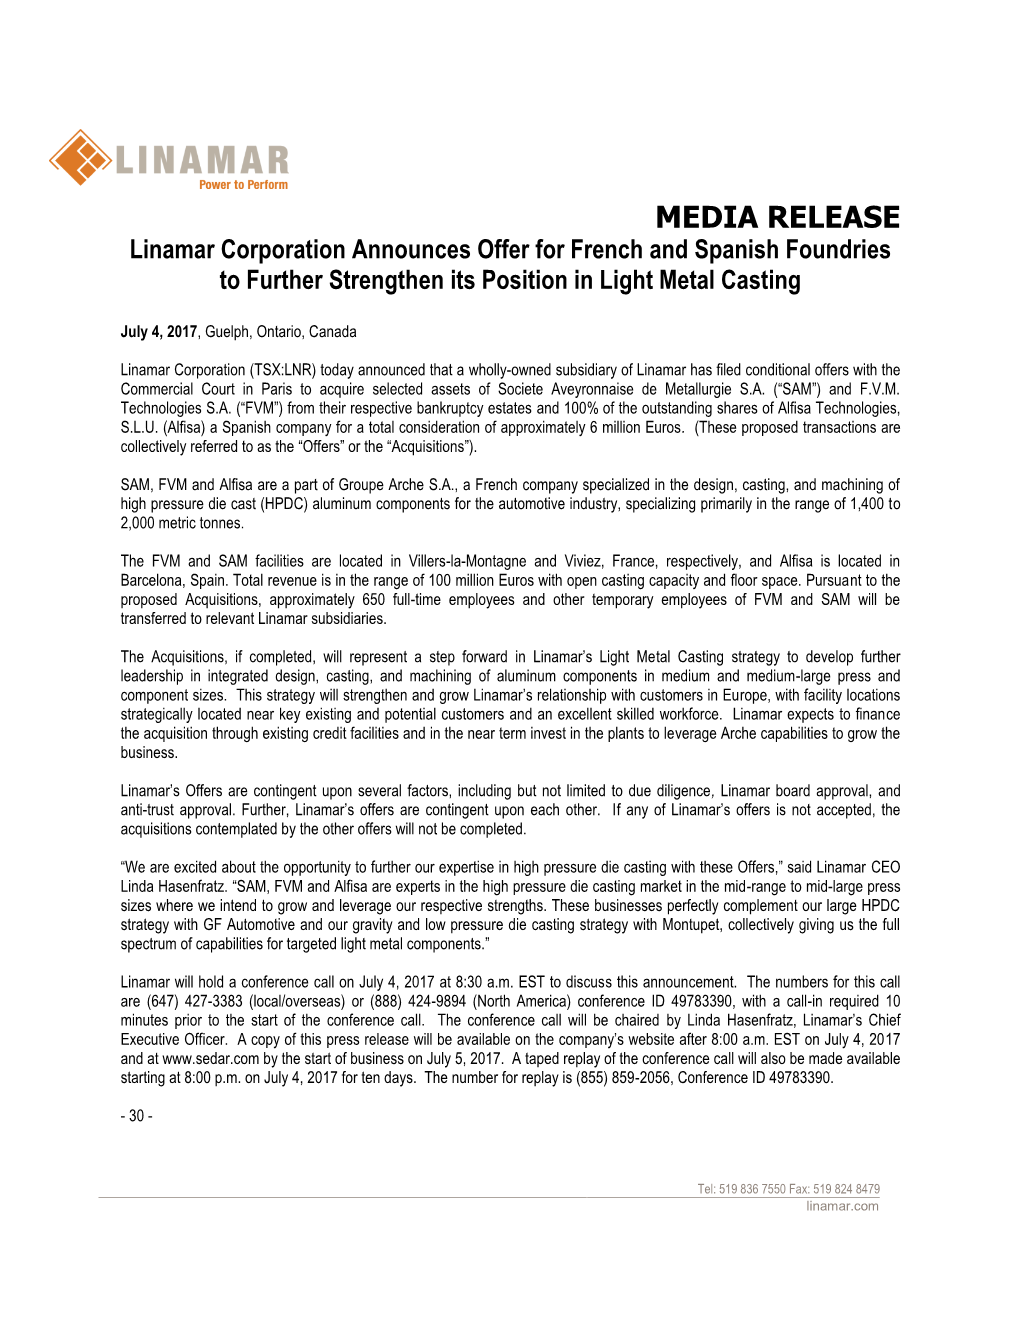 MEDIA RELEASE Linamar Corporation Announces Offer for French and Spanish Foundries to Further Strengthen Its Position in Light Metal Casting